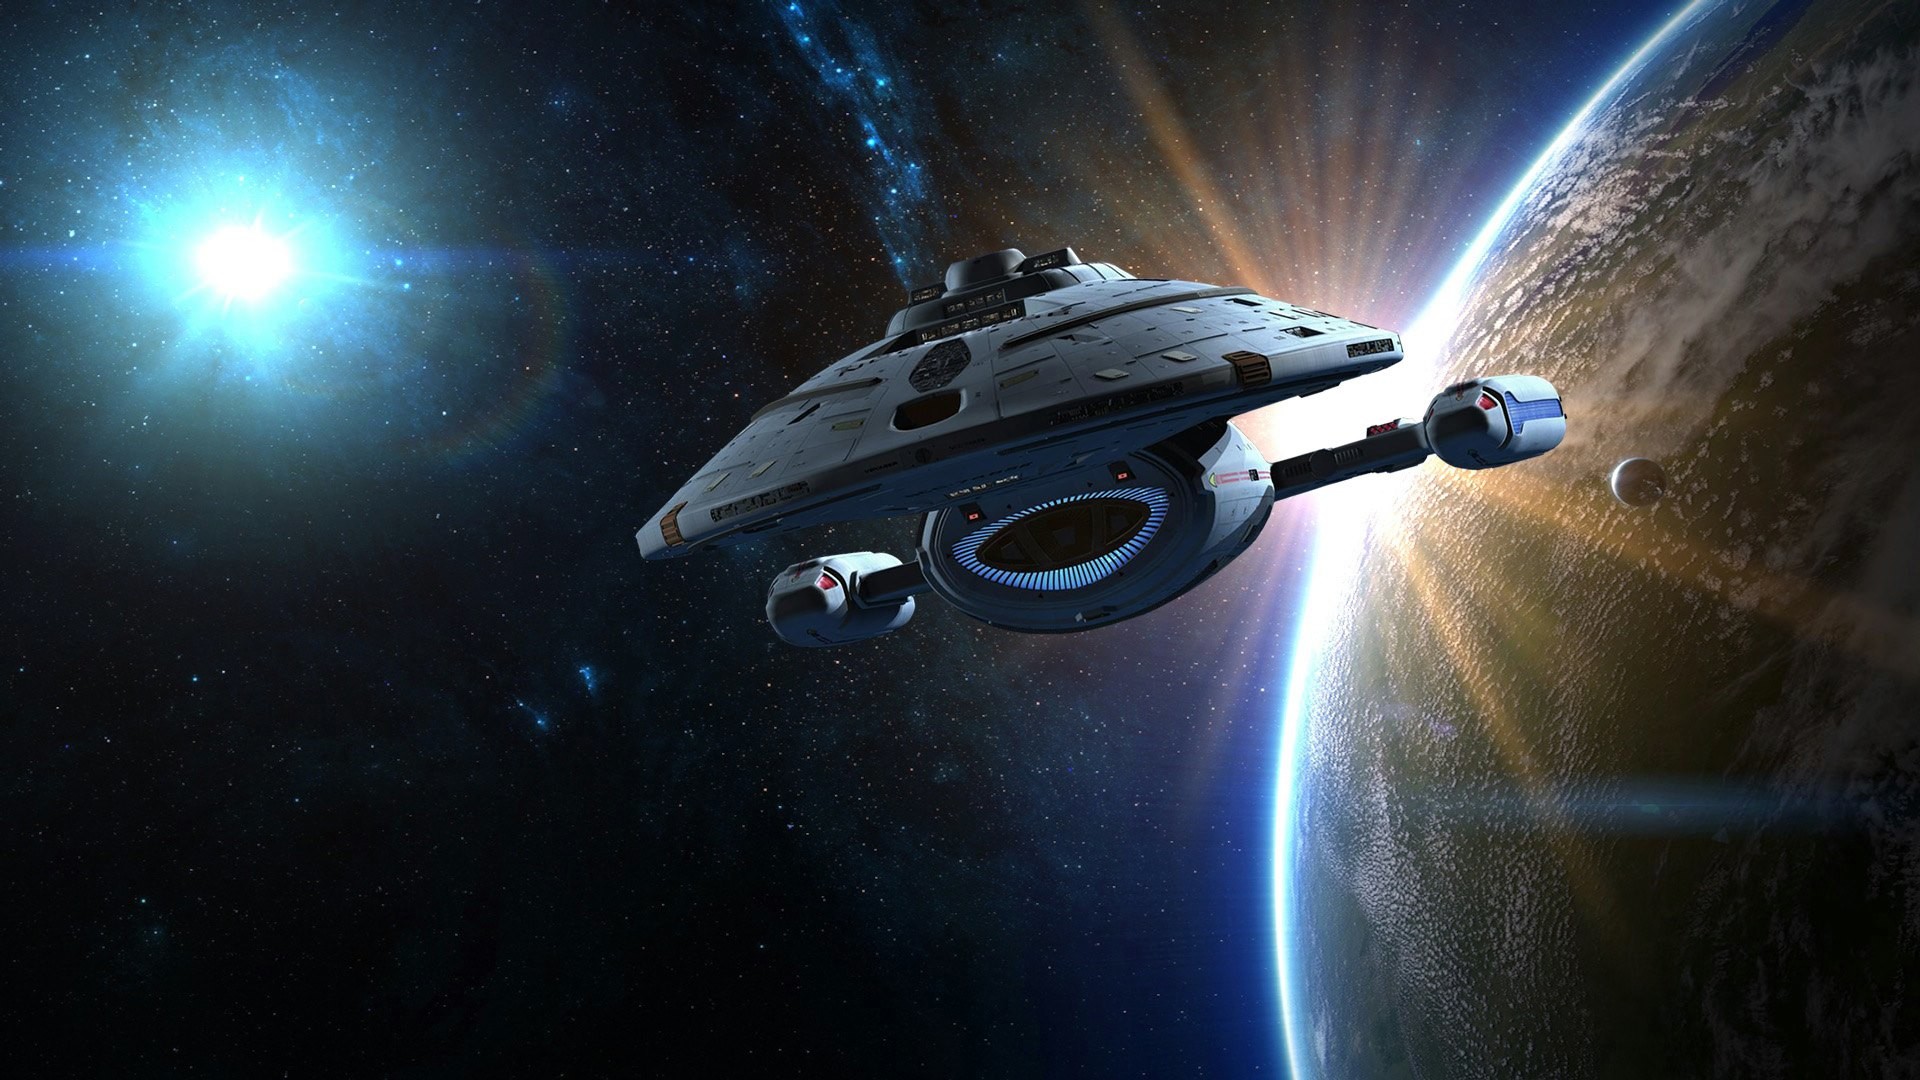 1920x1080 Star Trek Pictures, DH369 Collection